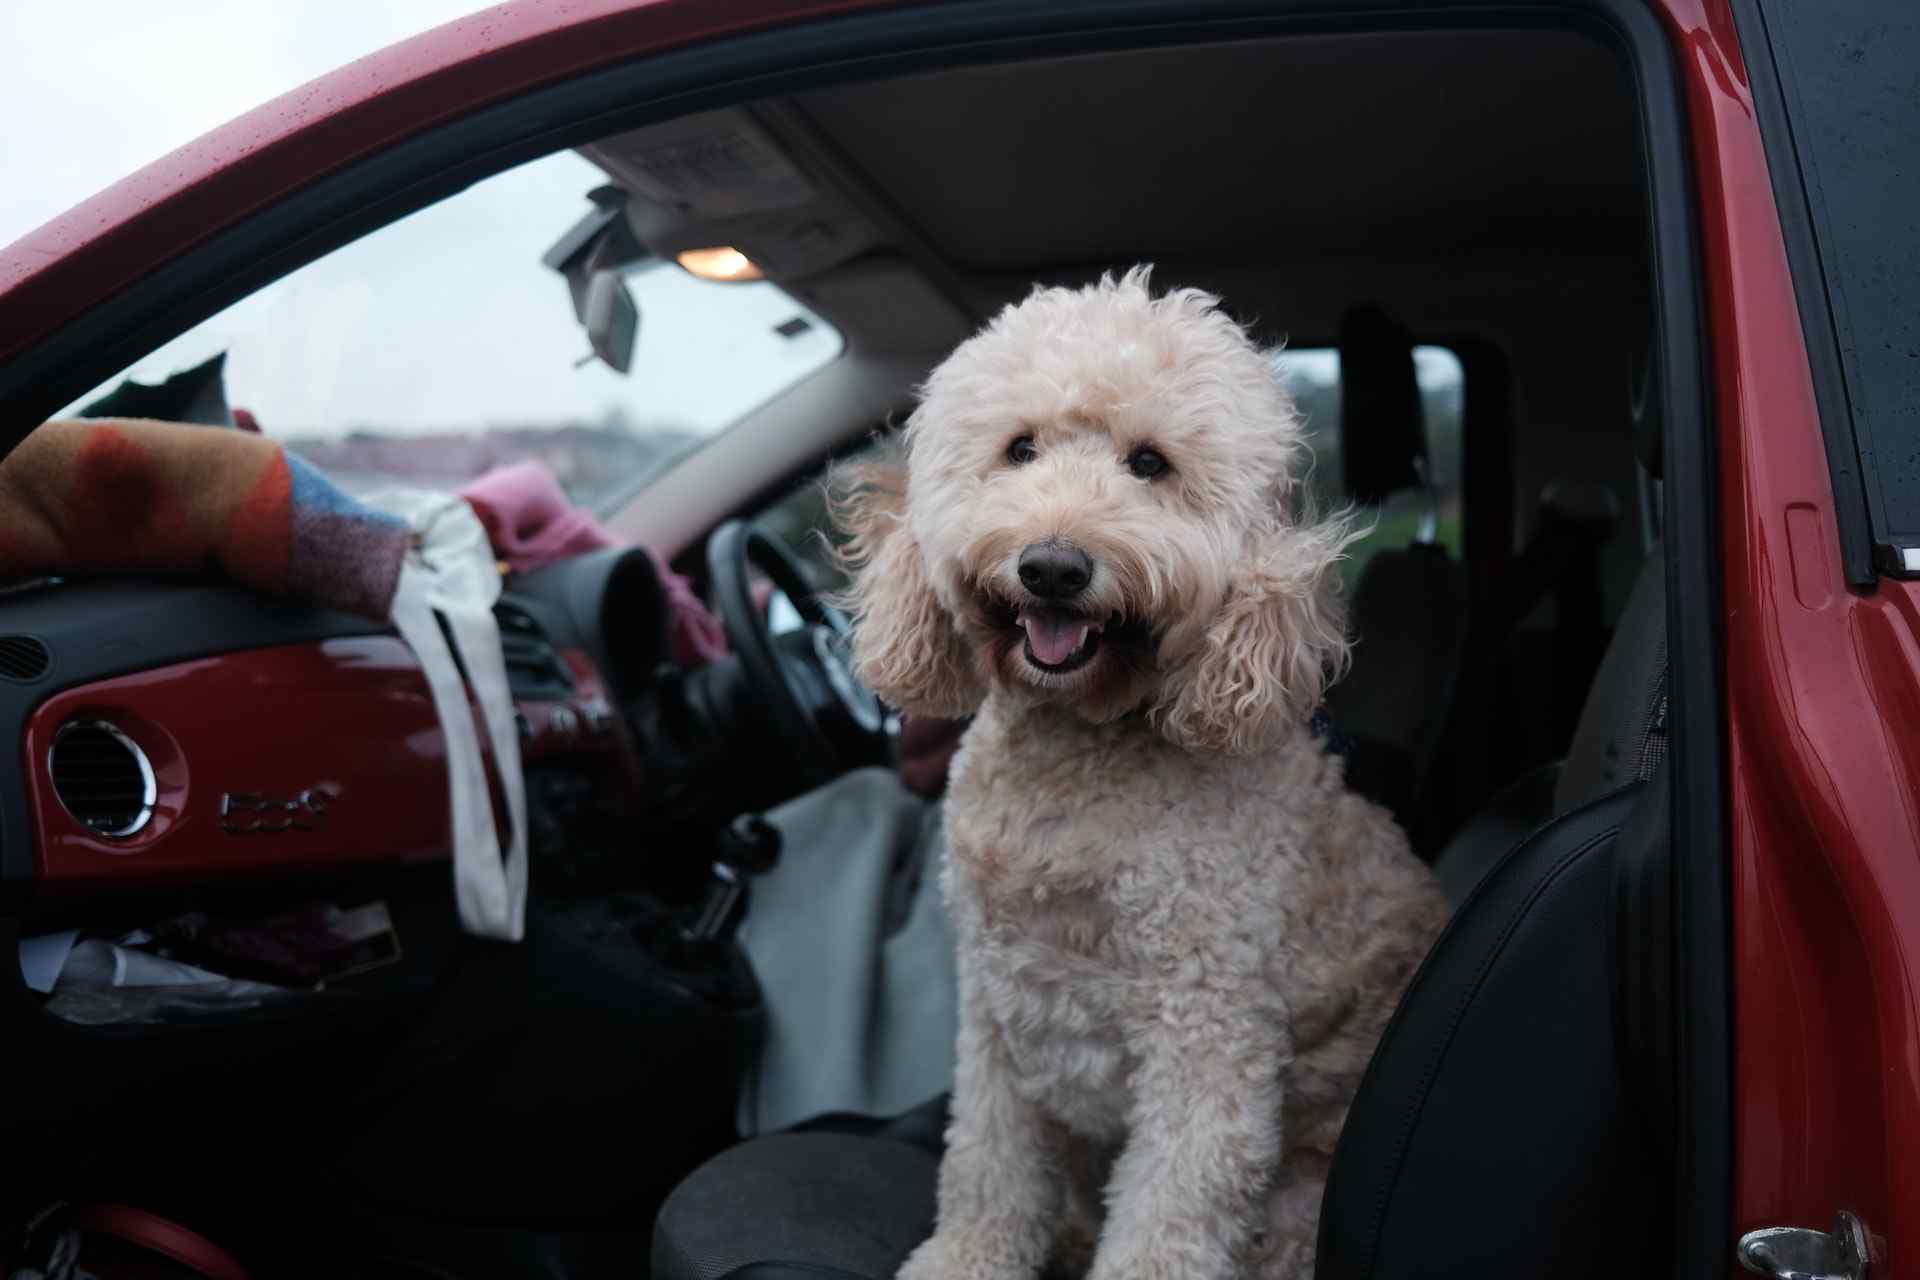 Is It Illegal To Leave Your Dog In A Car? (Safety Tips & Laws)